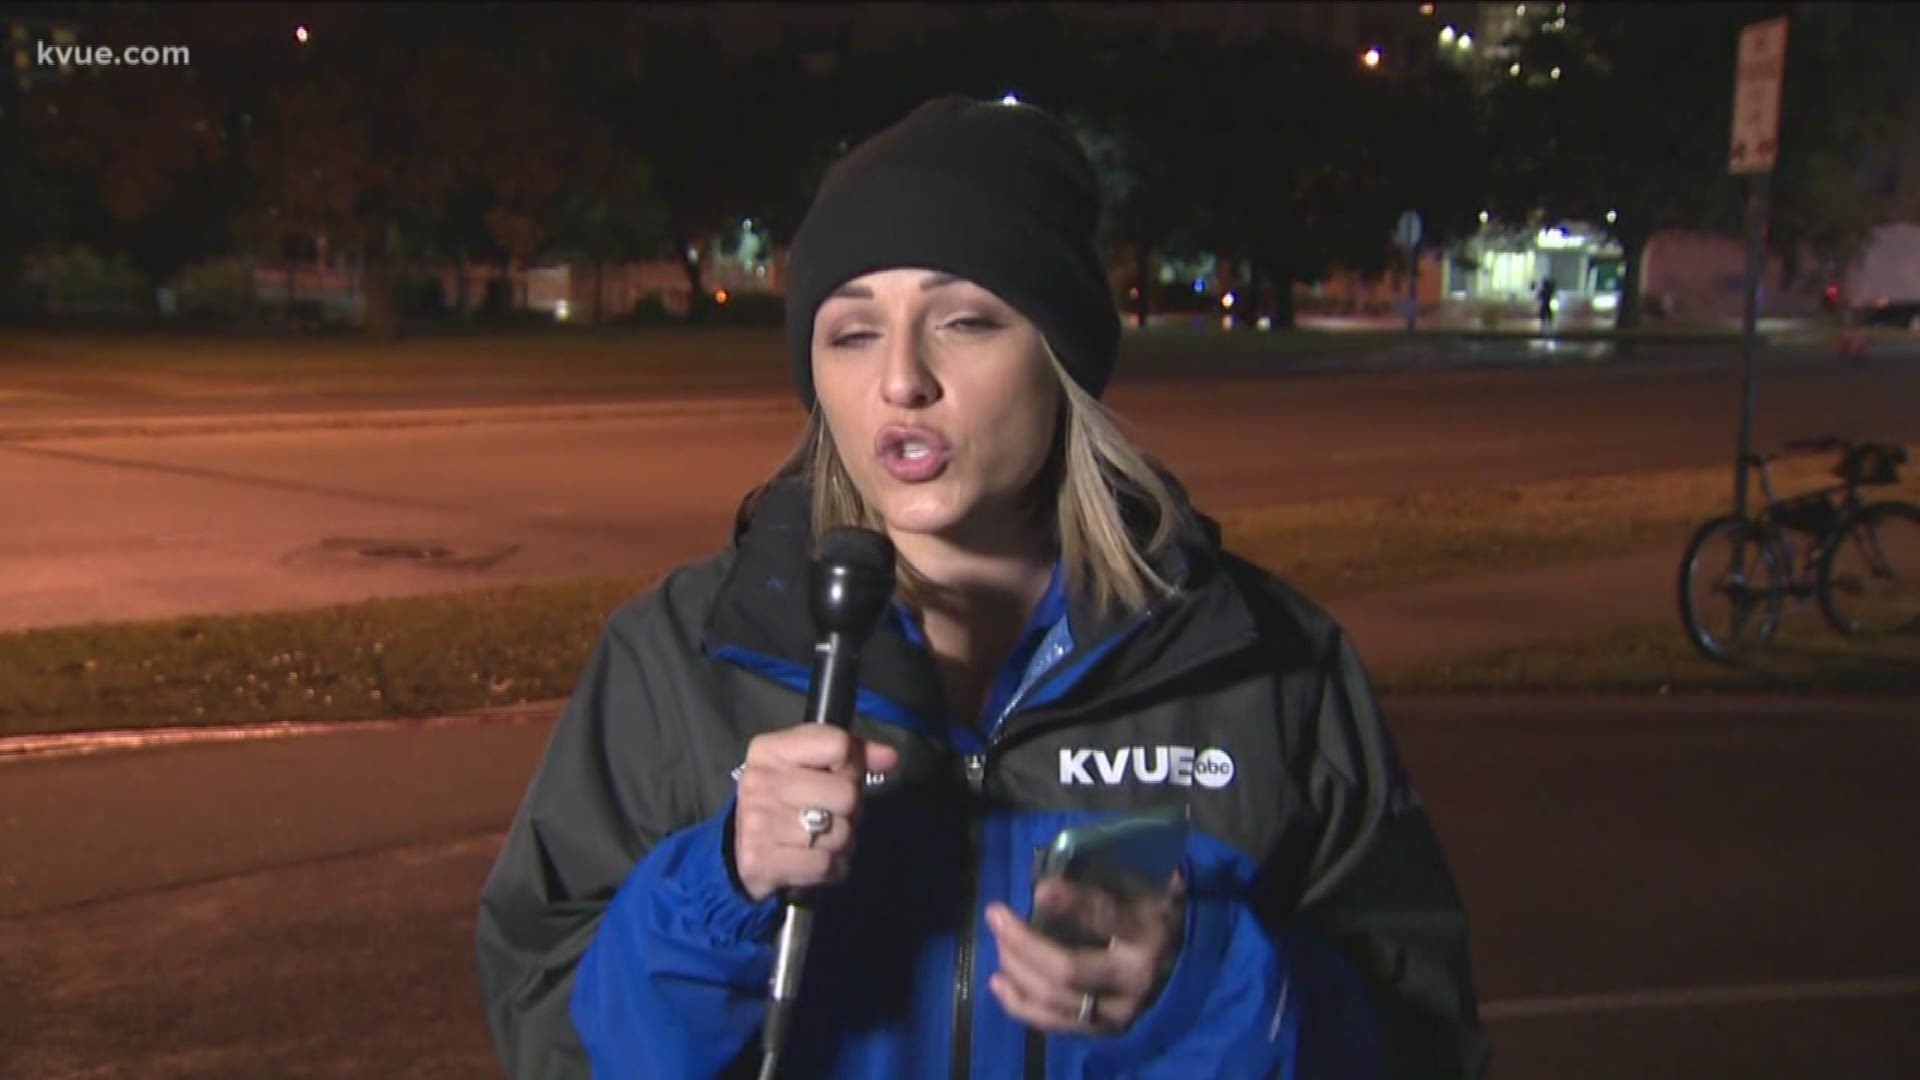 KVUE's Brittany Flowers was live ahead of the big run.